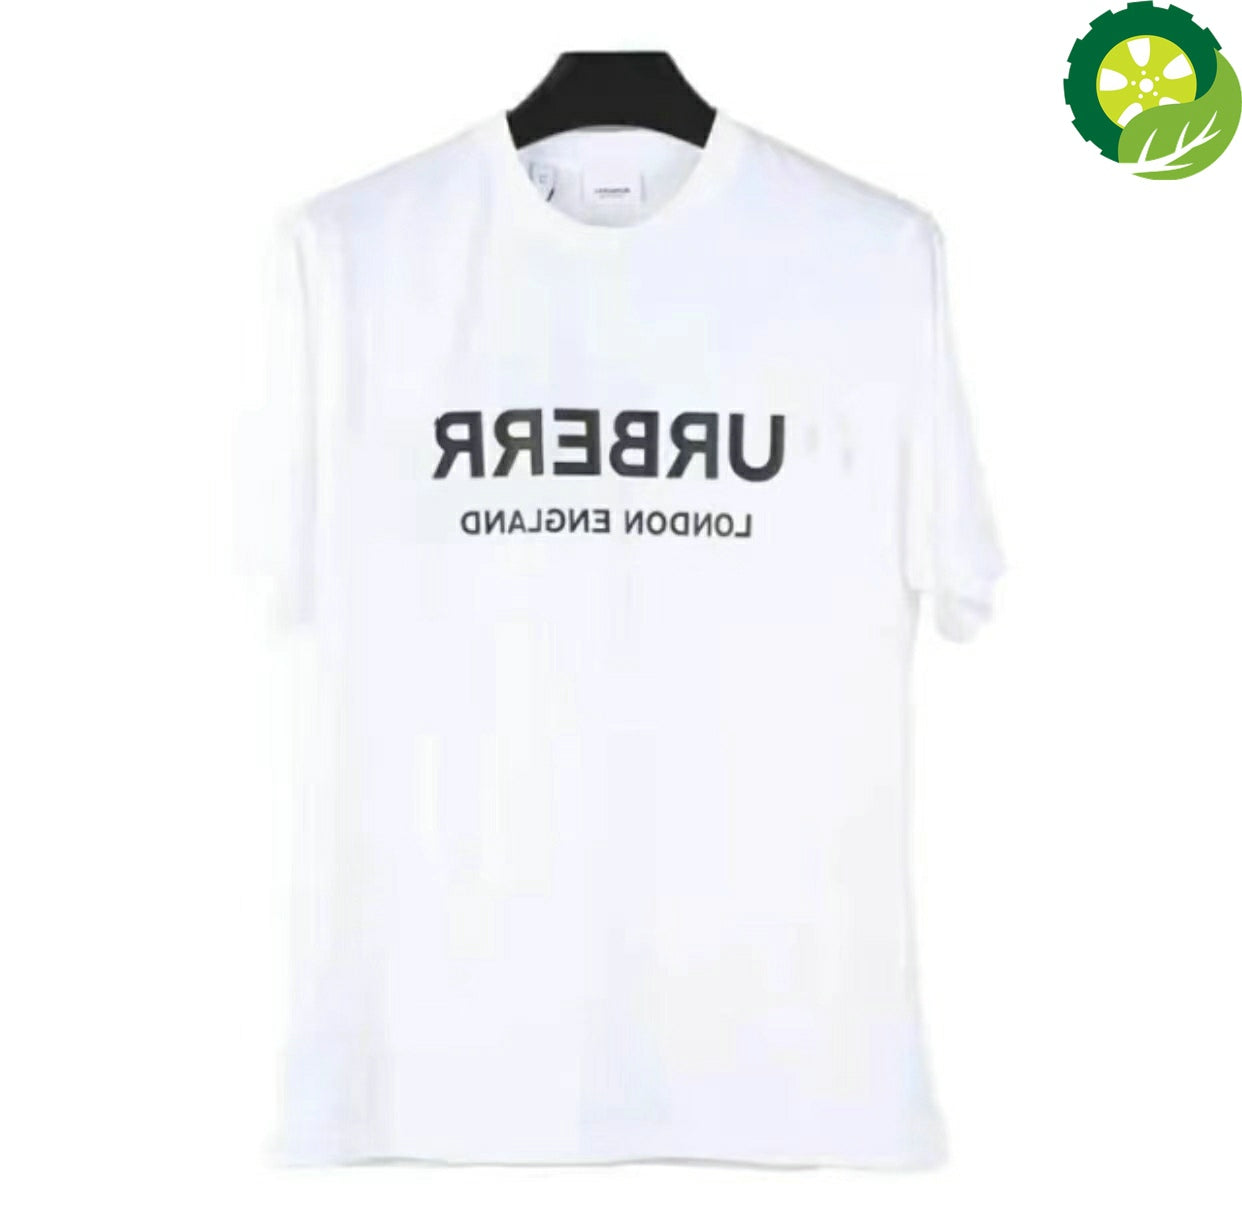 New Fashion unisex Couples Luxury Printed Cotton T-shirt Female Summer Casual Brand Letters Short-Sleeved Shirt TIANTIAN LIFE Market Place